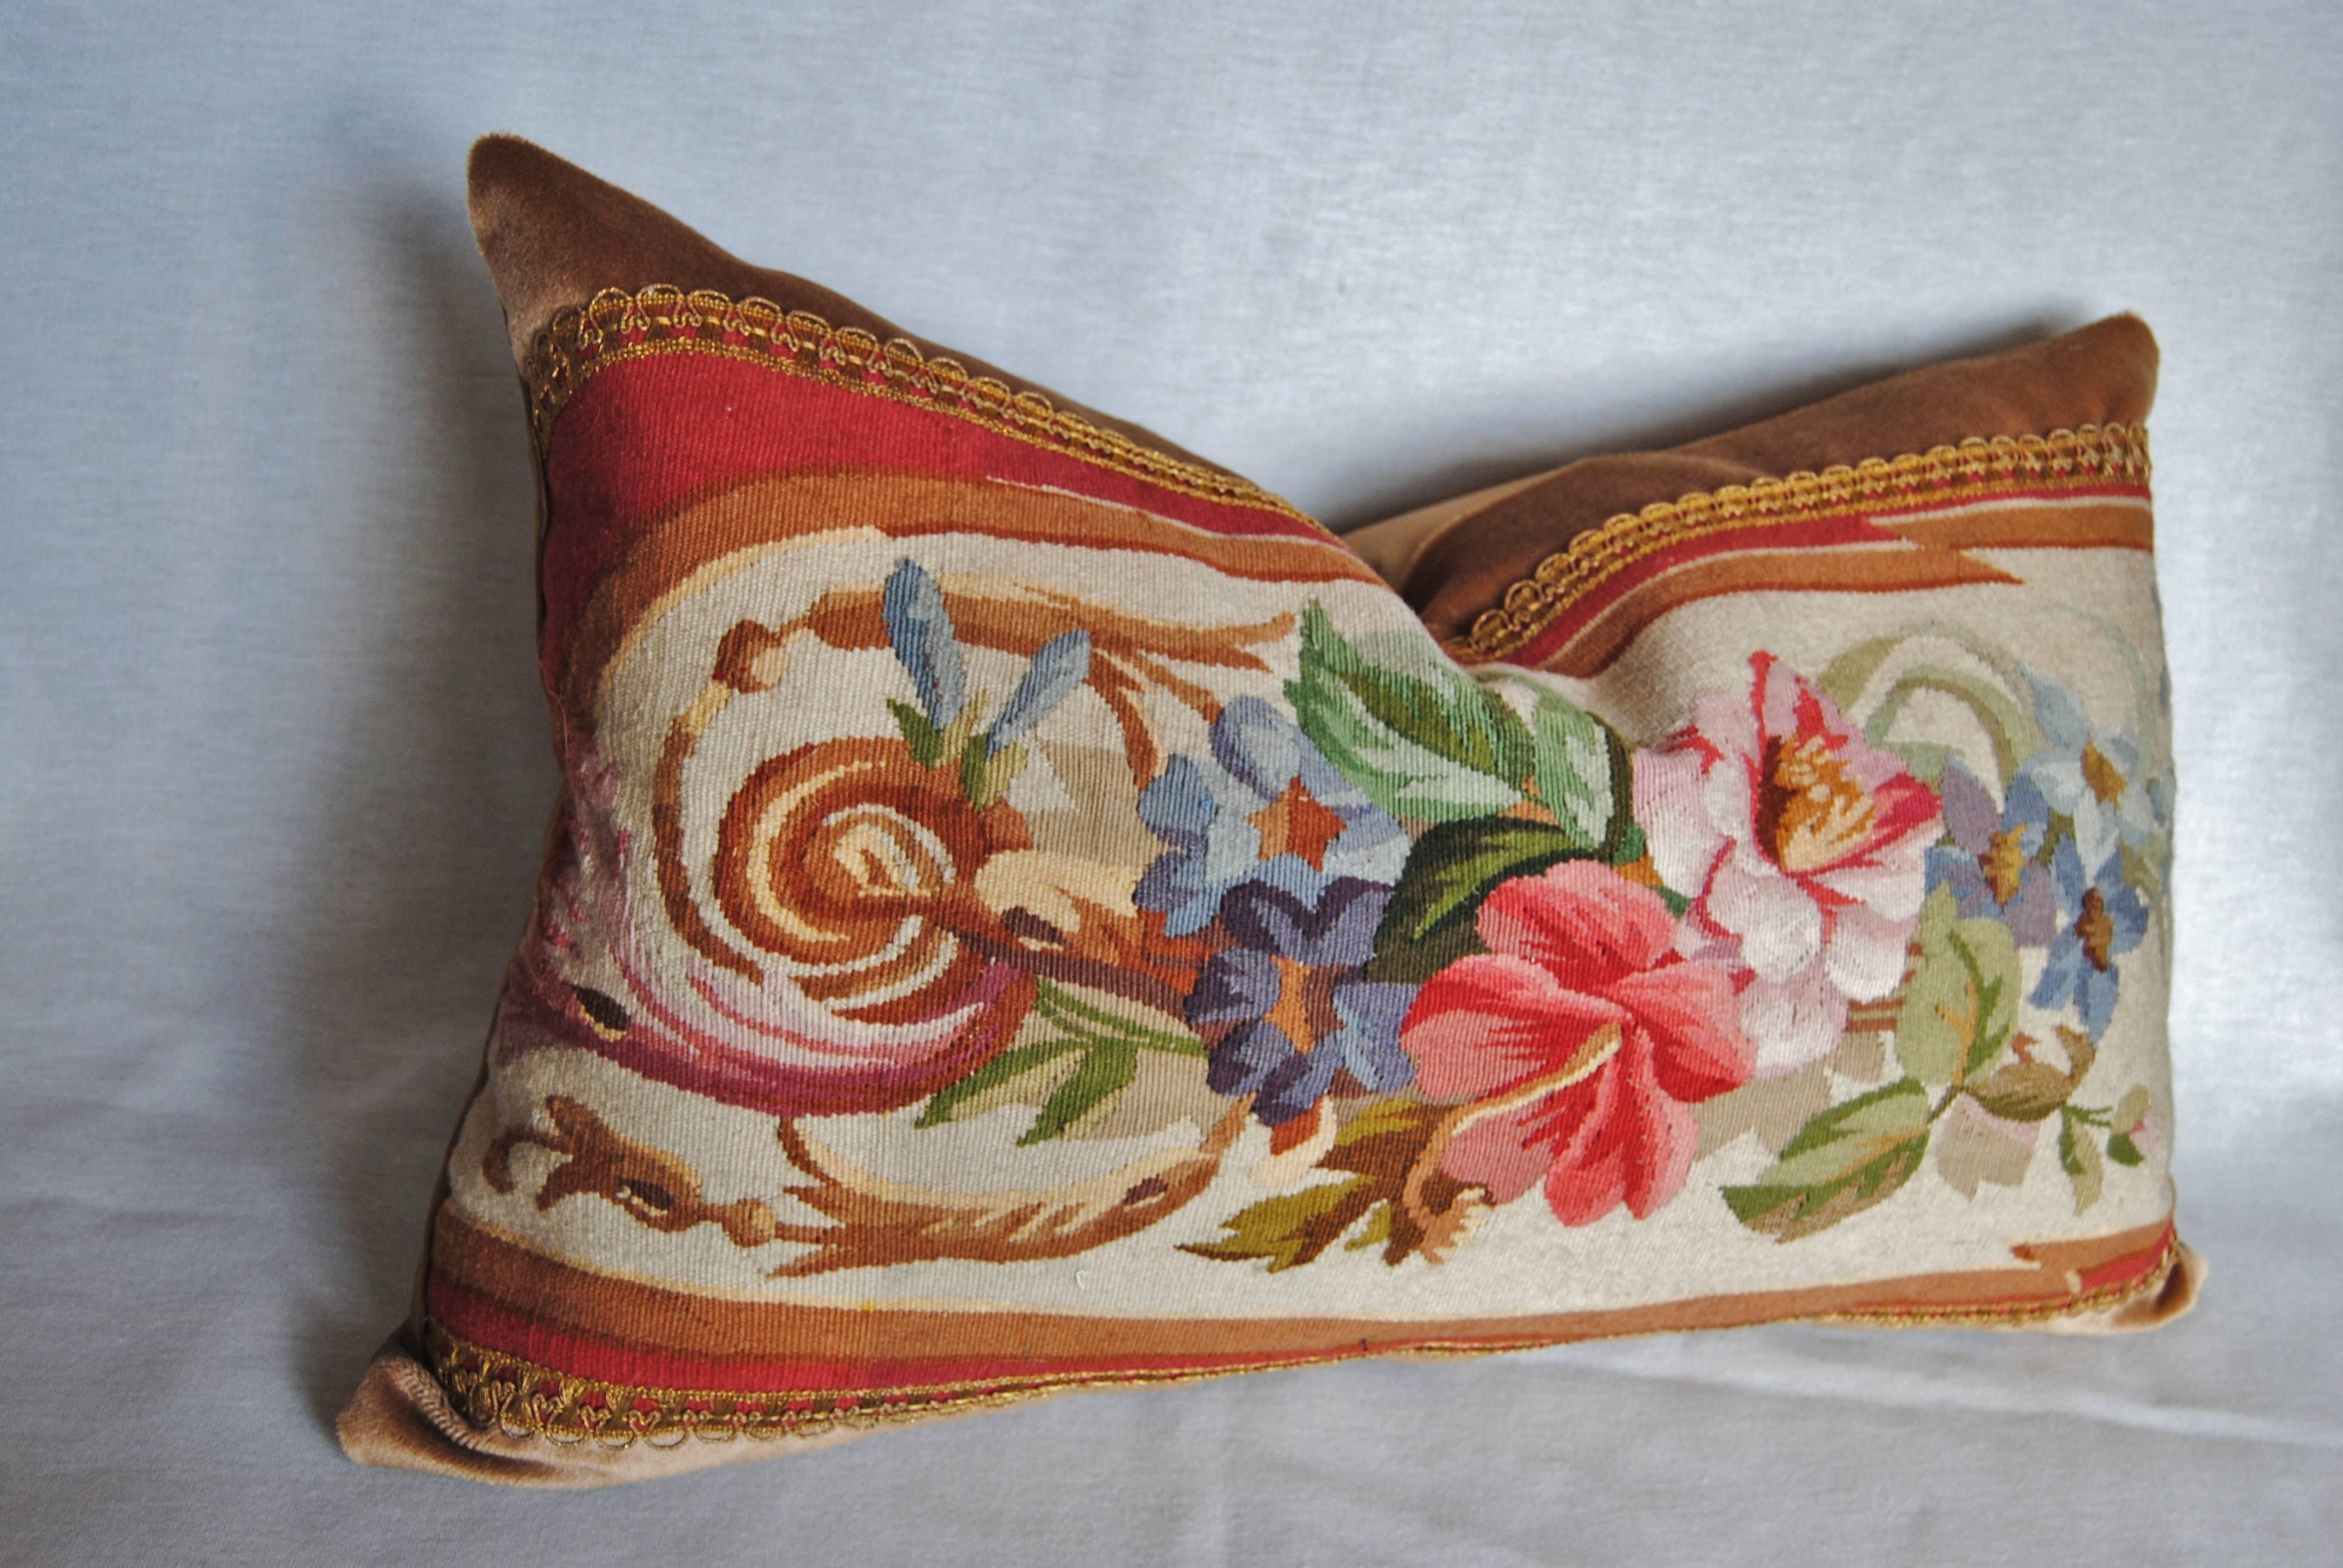 Custom pillow cut from an antique French Portiere from the mid to late 19th century. Color is strong and detail is spectacular. The tapestry is mounted on mohair and edged with an antique gilt trim. The pillow is backed in silk, filled with an